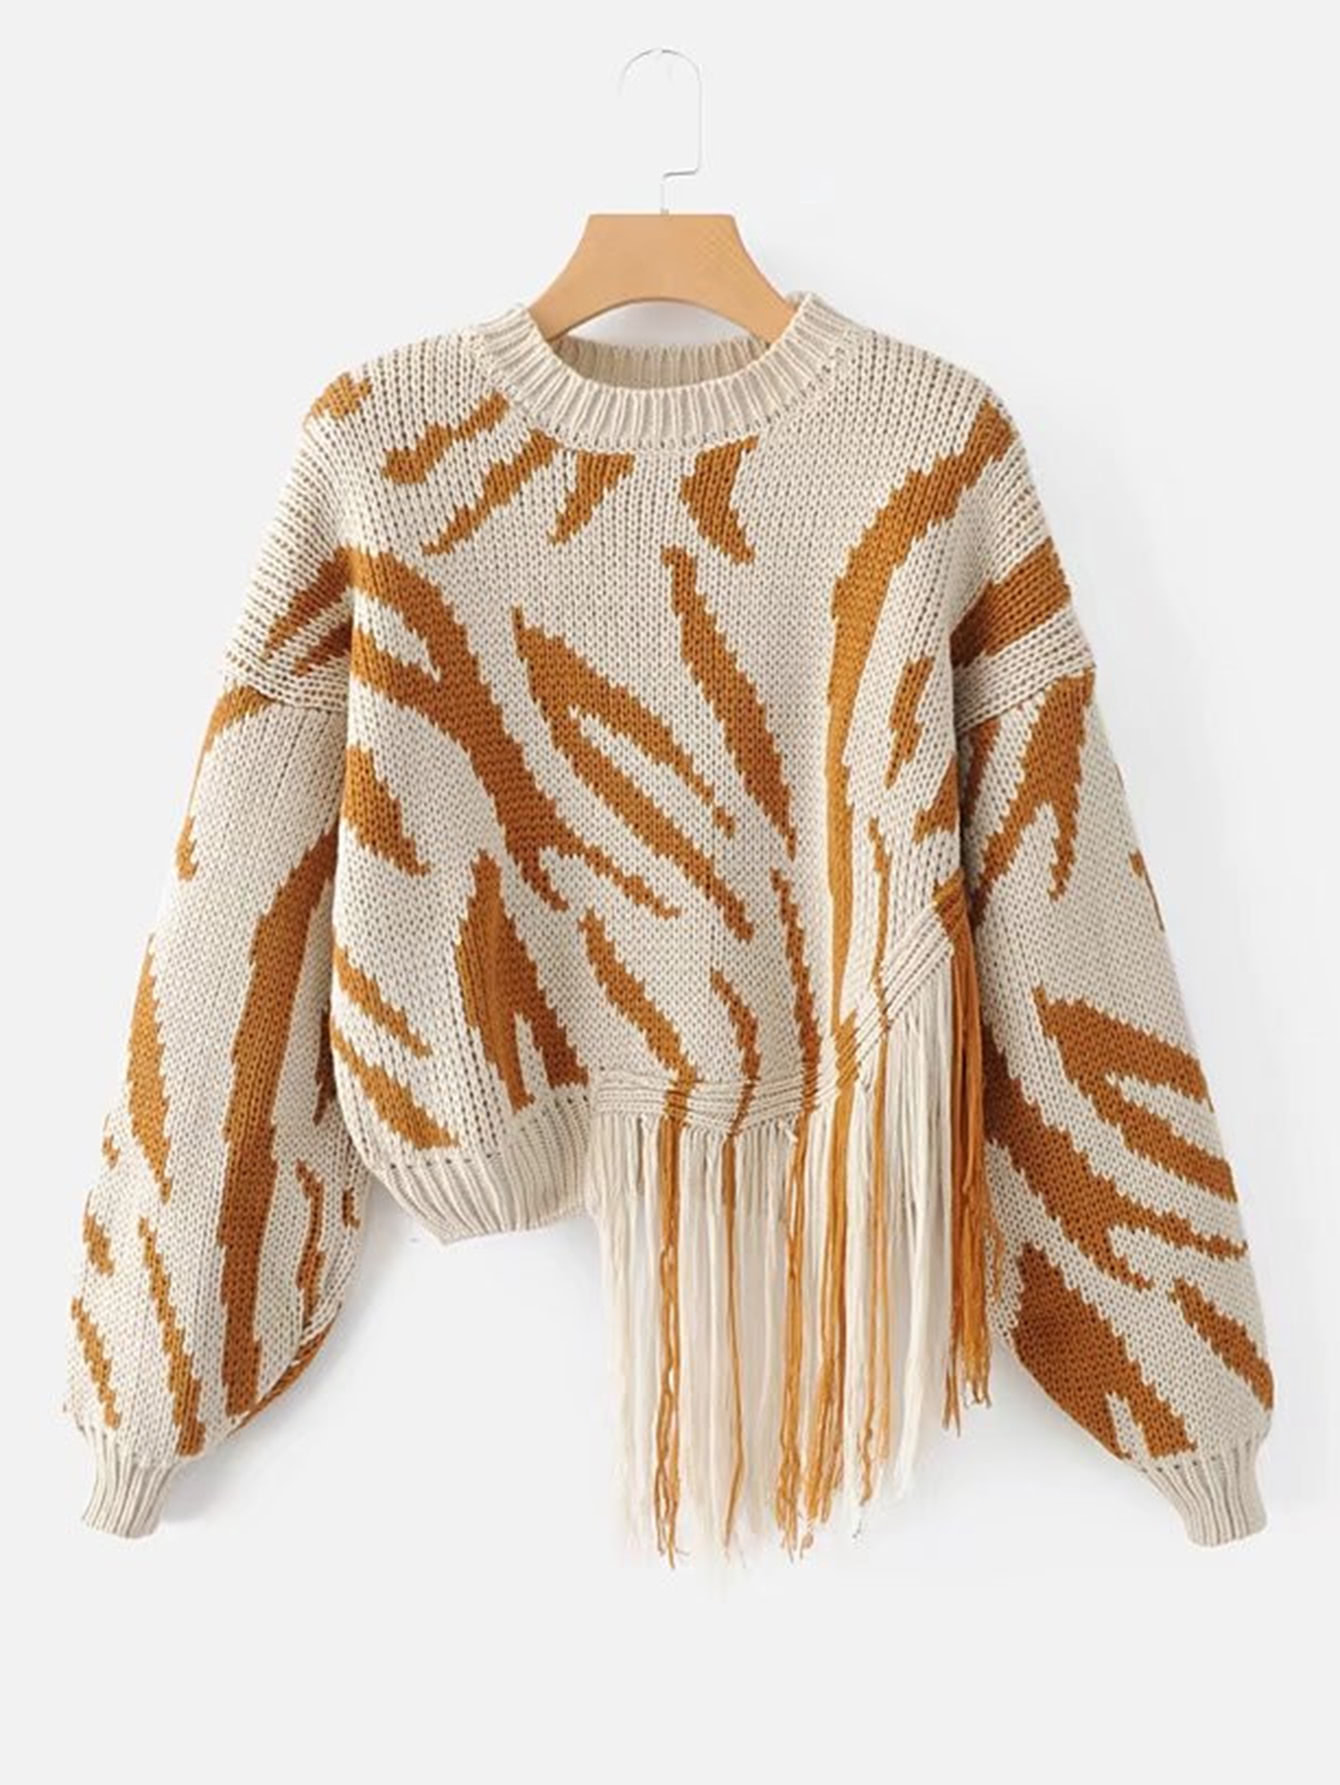 Top 13 Fringe Sweater Outfit Ideas for Women: Style Guide